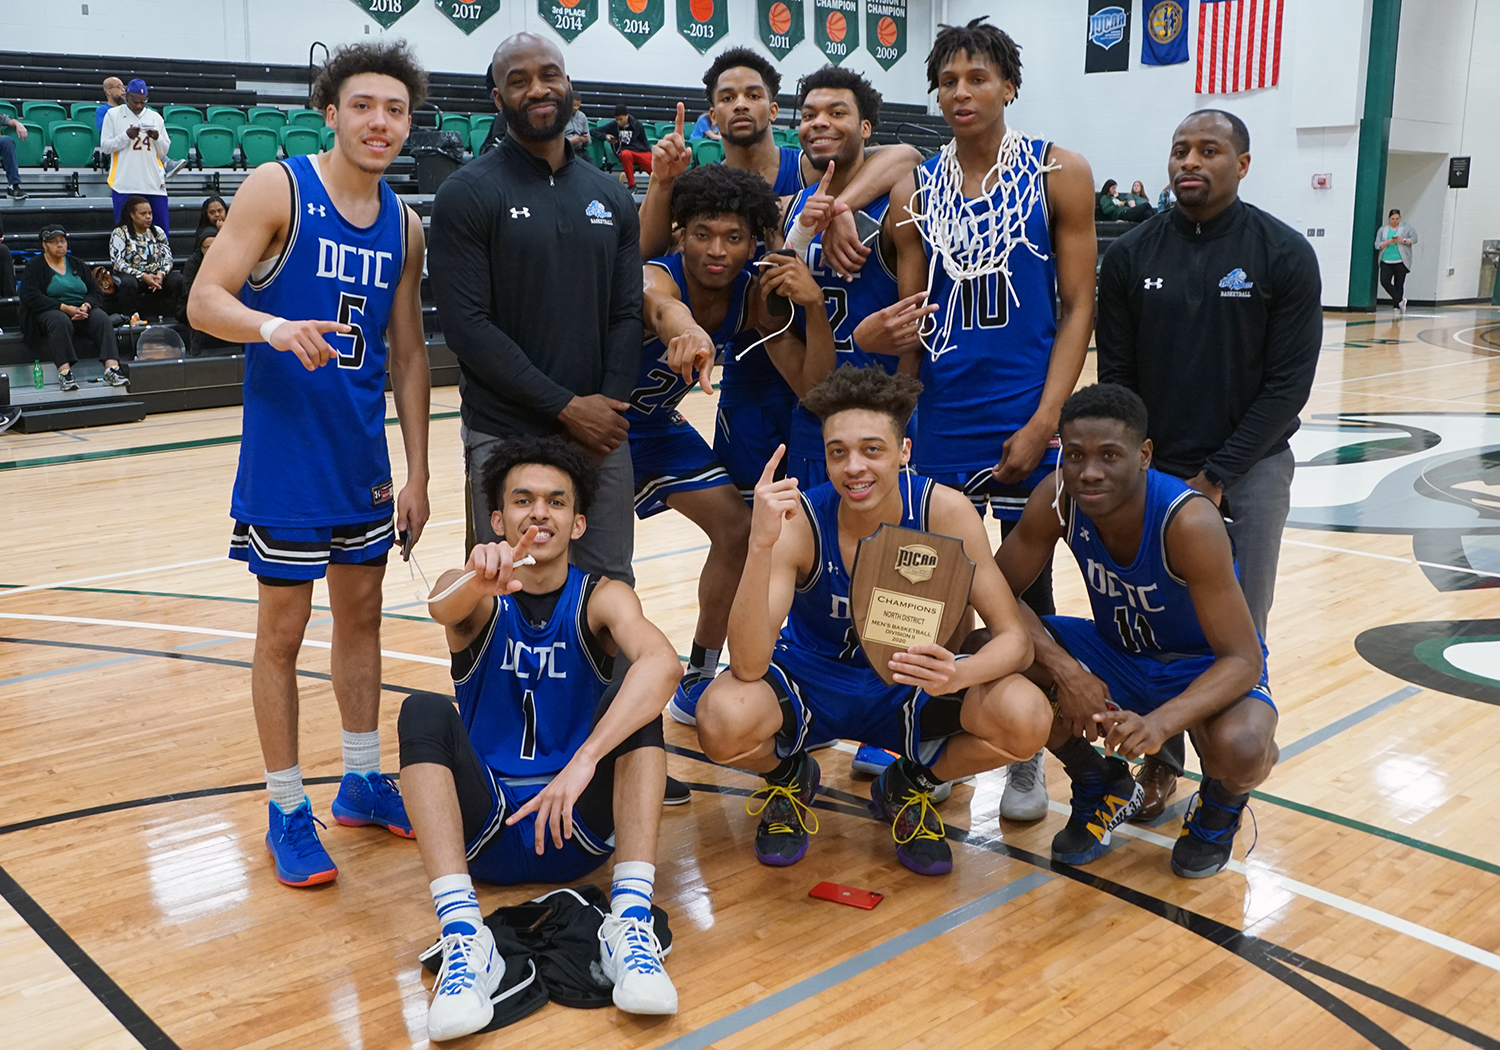 DCTC BASKETBALL ADVANCES TO NATIONALS